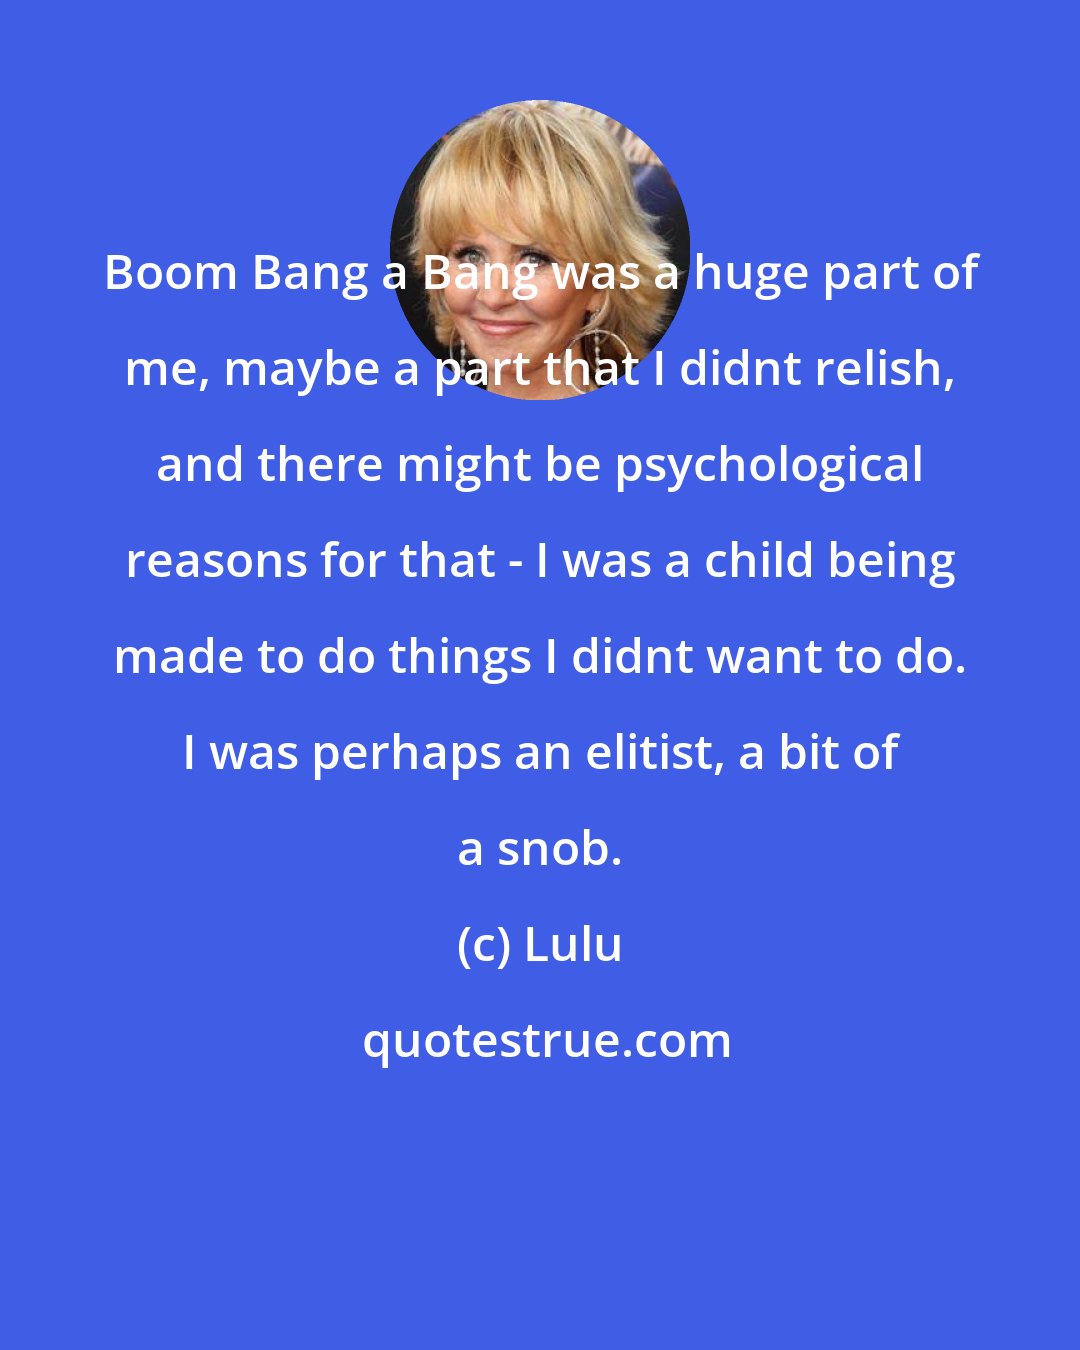 Lulu: Boom Bang a Bang was a huge part of me, maybe a part that I didnt relish, and there might be psychological reasons for that - I was a child being made to do things I didnt want to do. I was perhaps an elitist, a bit of a snob.